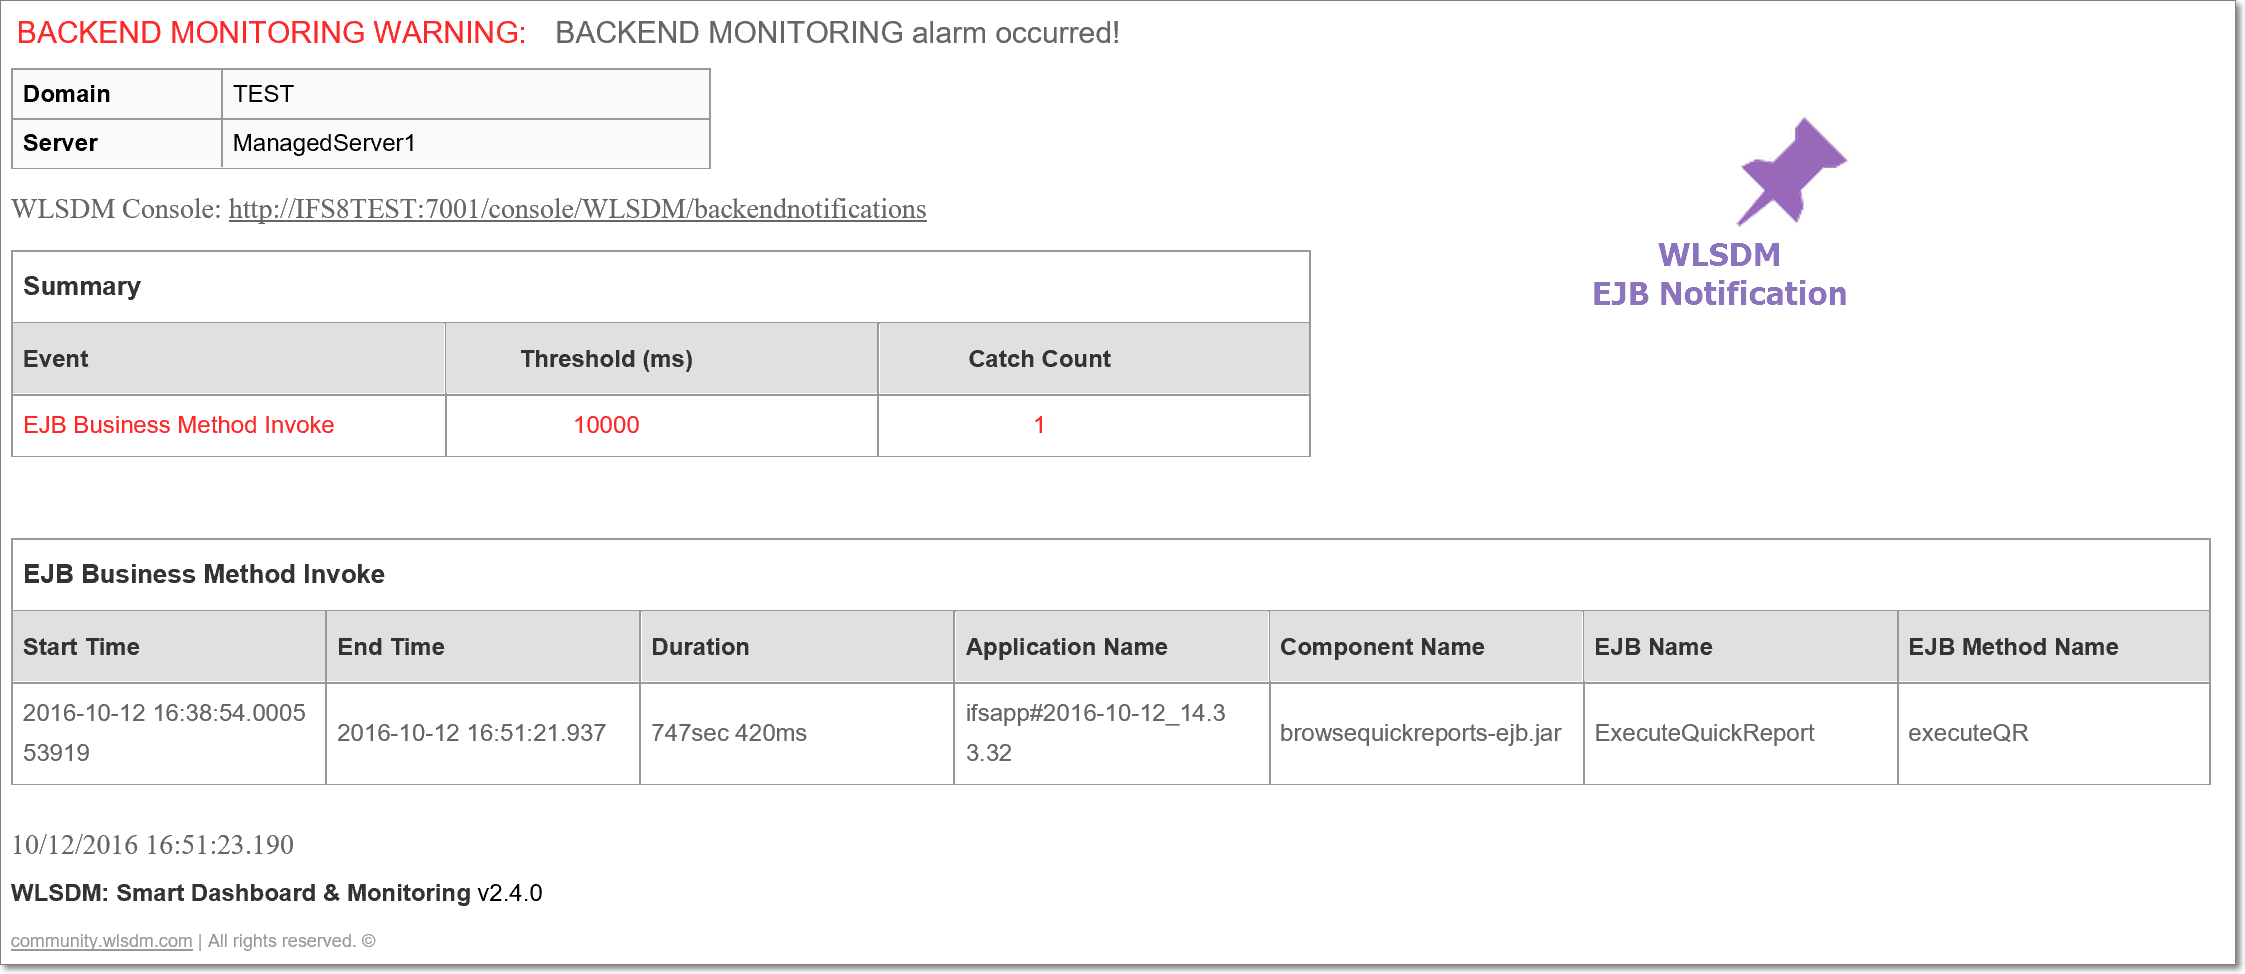 WLSDM: SQL Notification/ALARM for IFS Domains